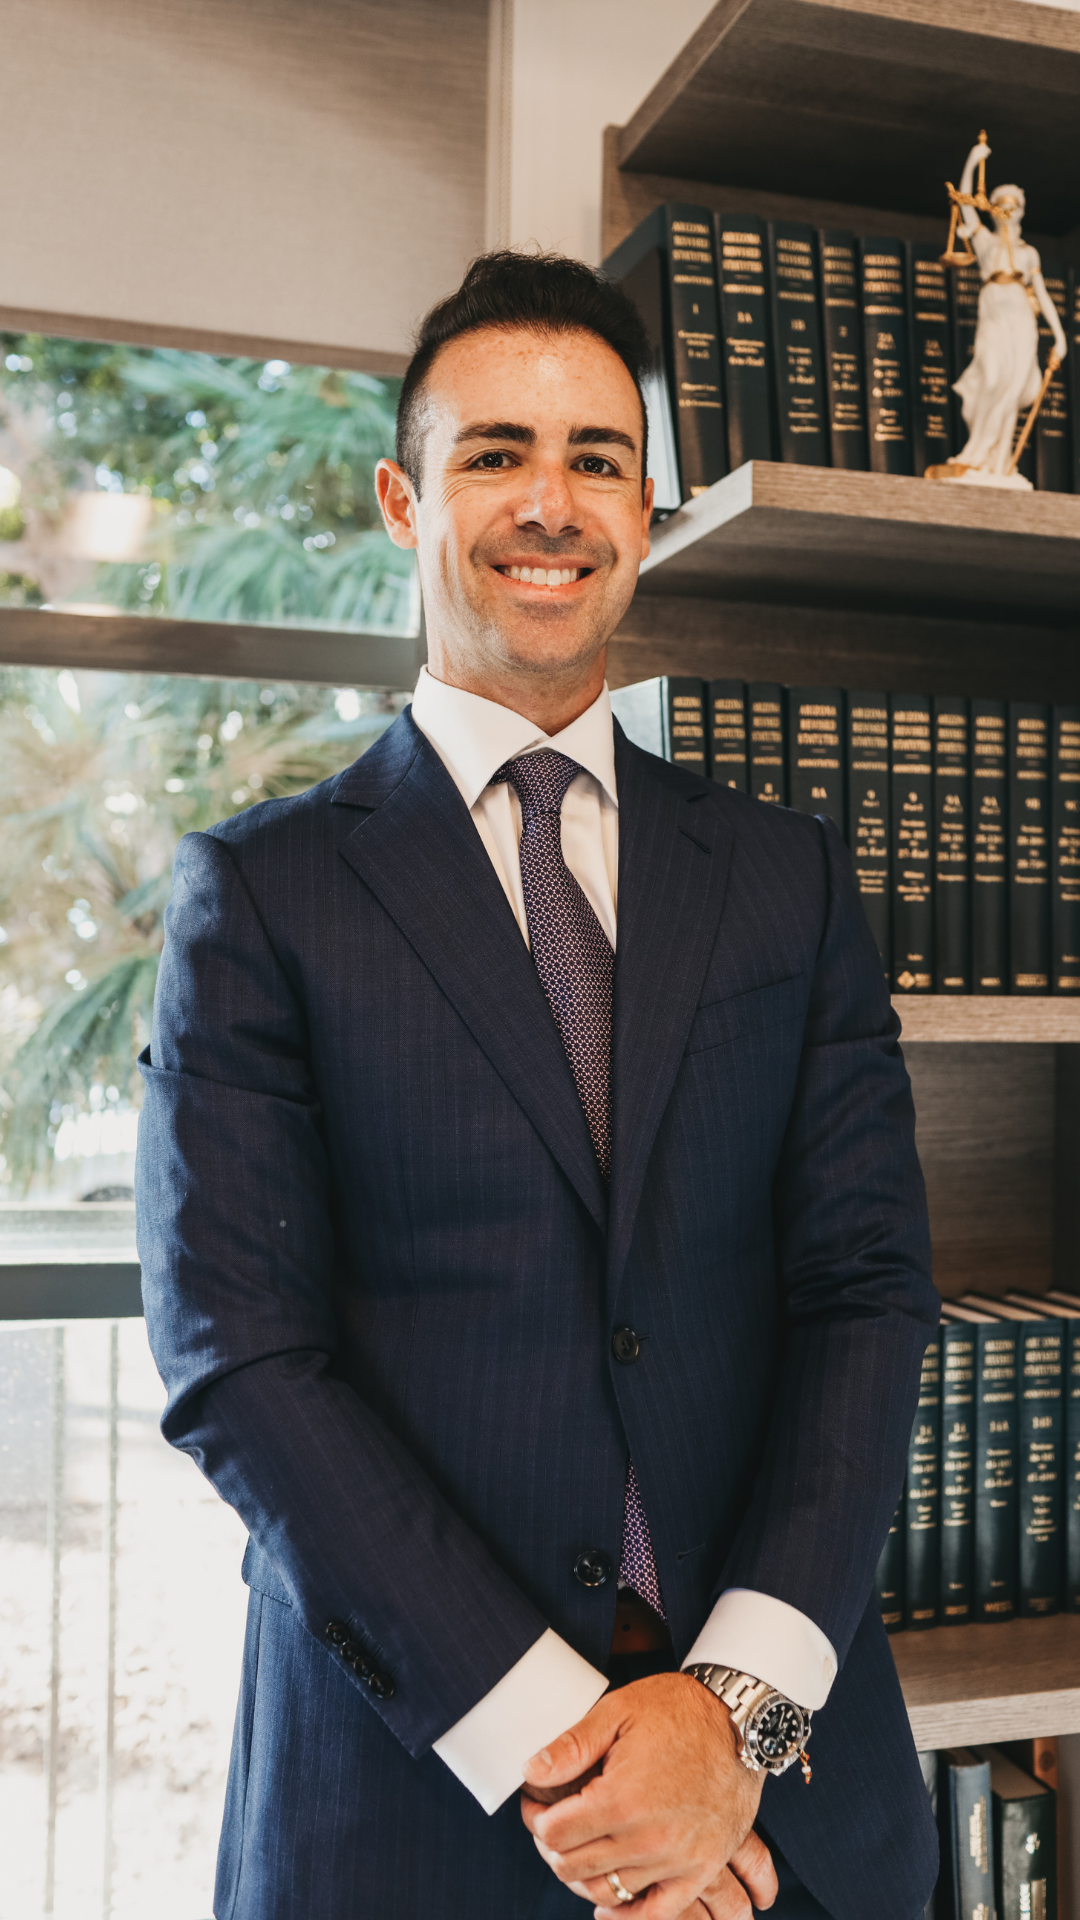 David Shapiro is an accomplished attorney who devoted his career to representing injured people against wrongdoers and irresponsible parties. Licensed to practice in Arizona and New Mexico, Mr. Shapiro has helped countless injured clients and their families recover substantial verdicts and settlements.